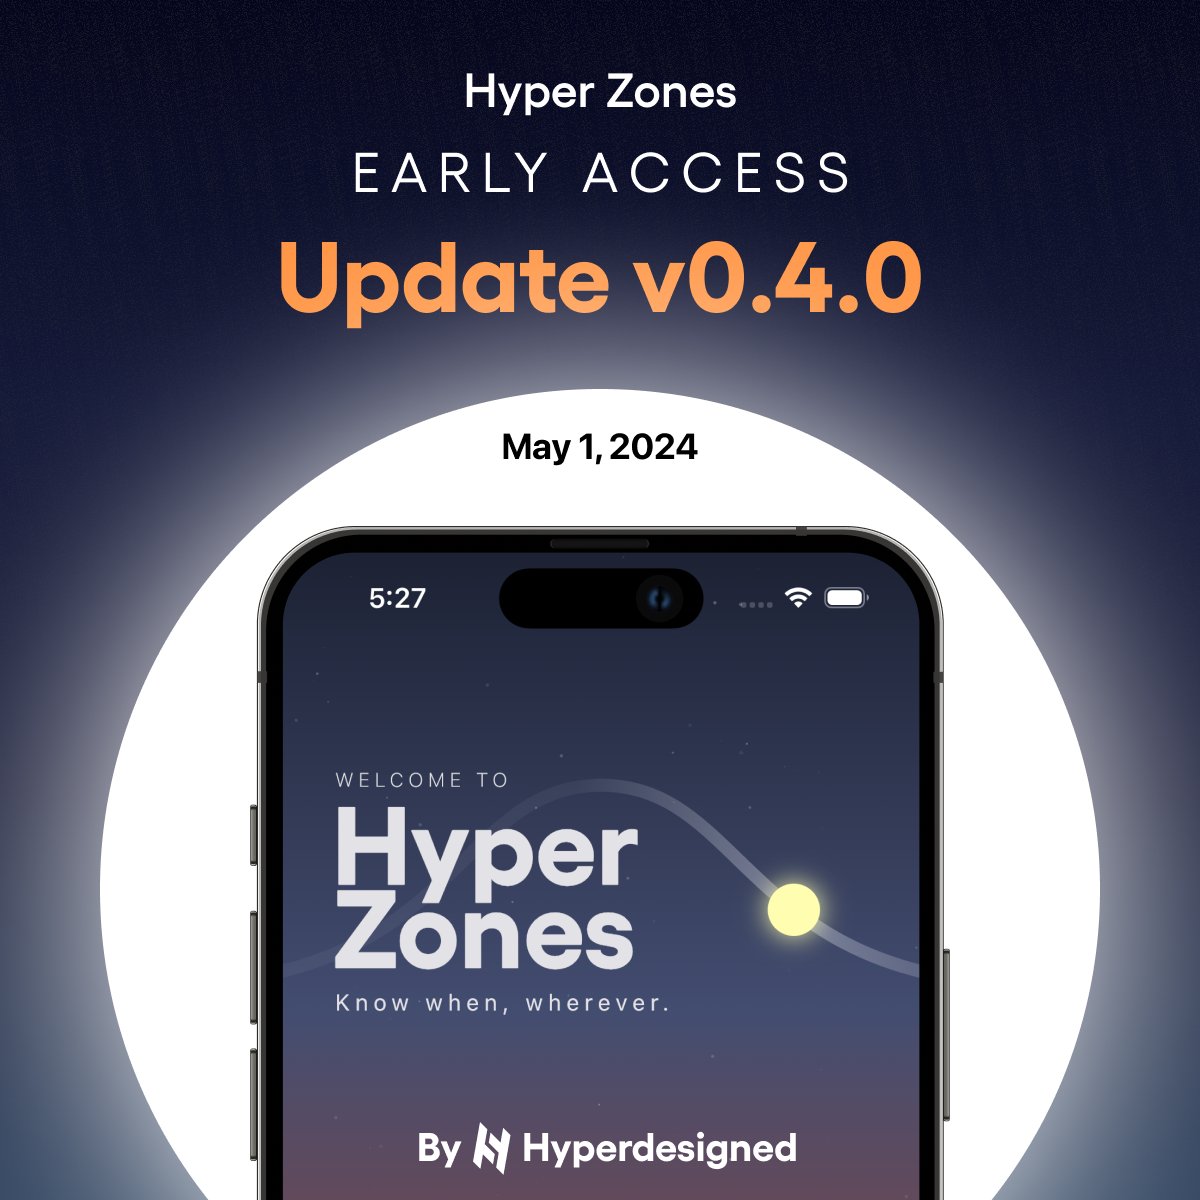 It's update time! We've got some changes that are truly ahead of their time... zones!

Download the app here 👉 bit.ly/3wBpwoo

Changes in the 🧵...

#remotework #wfh #digitalworkplace #flutterdev #flutter #indiedev